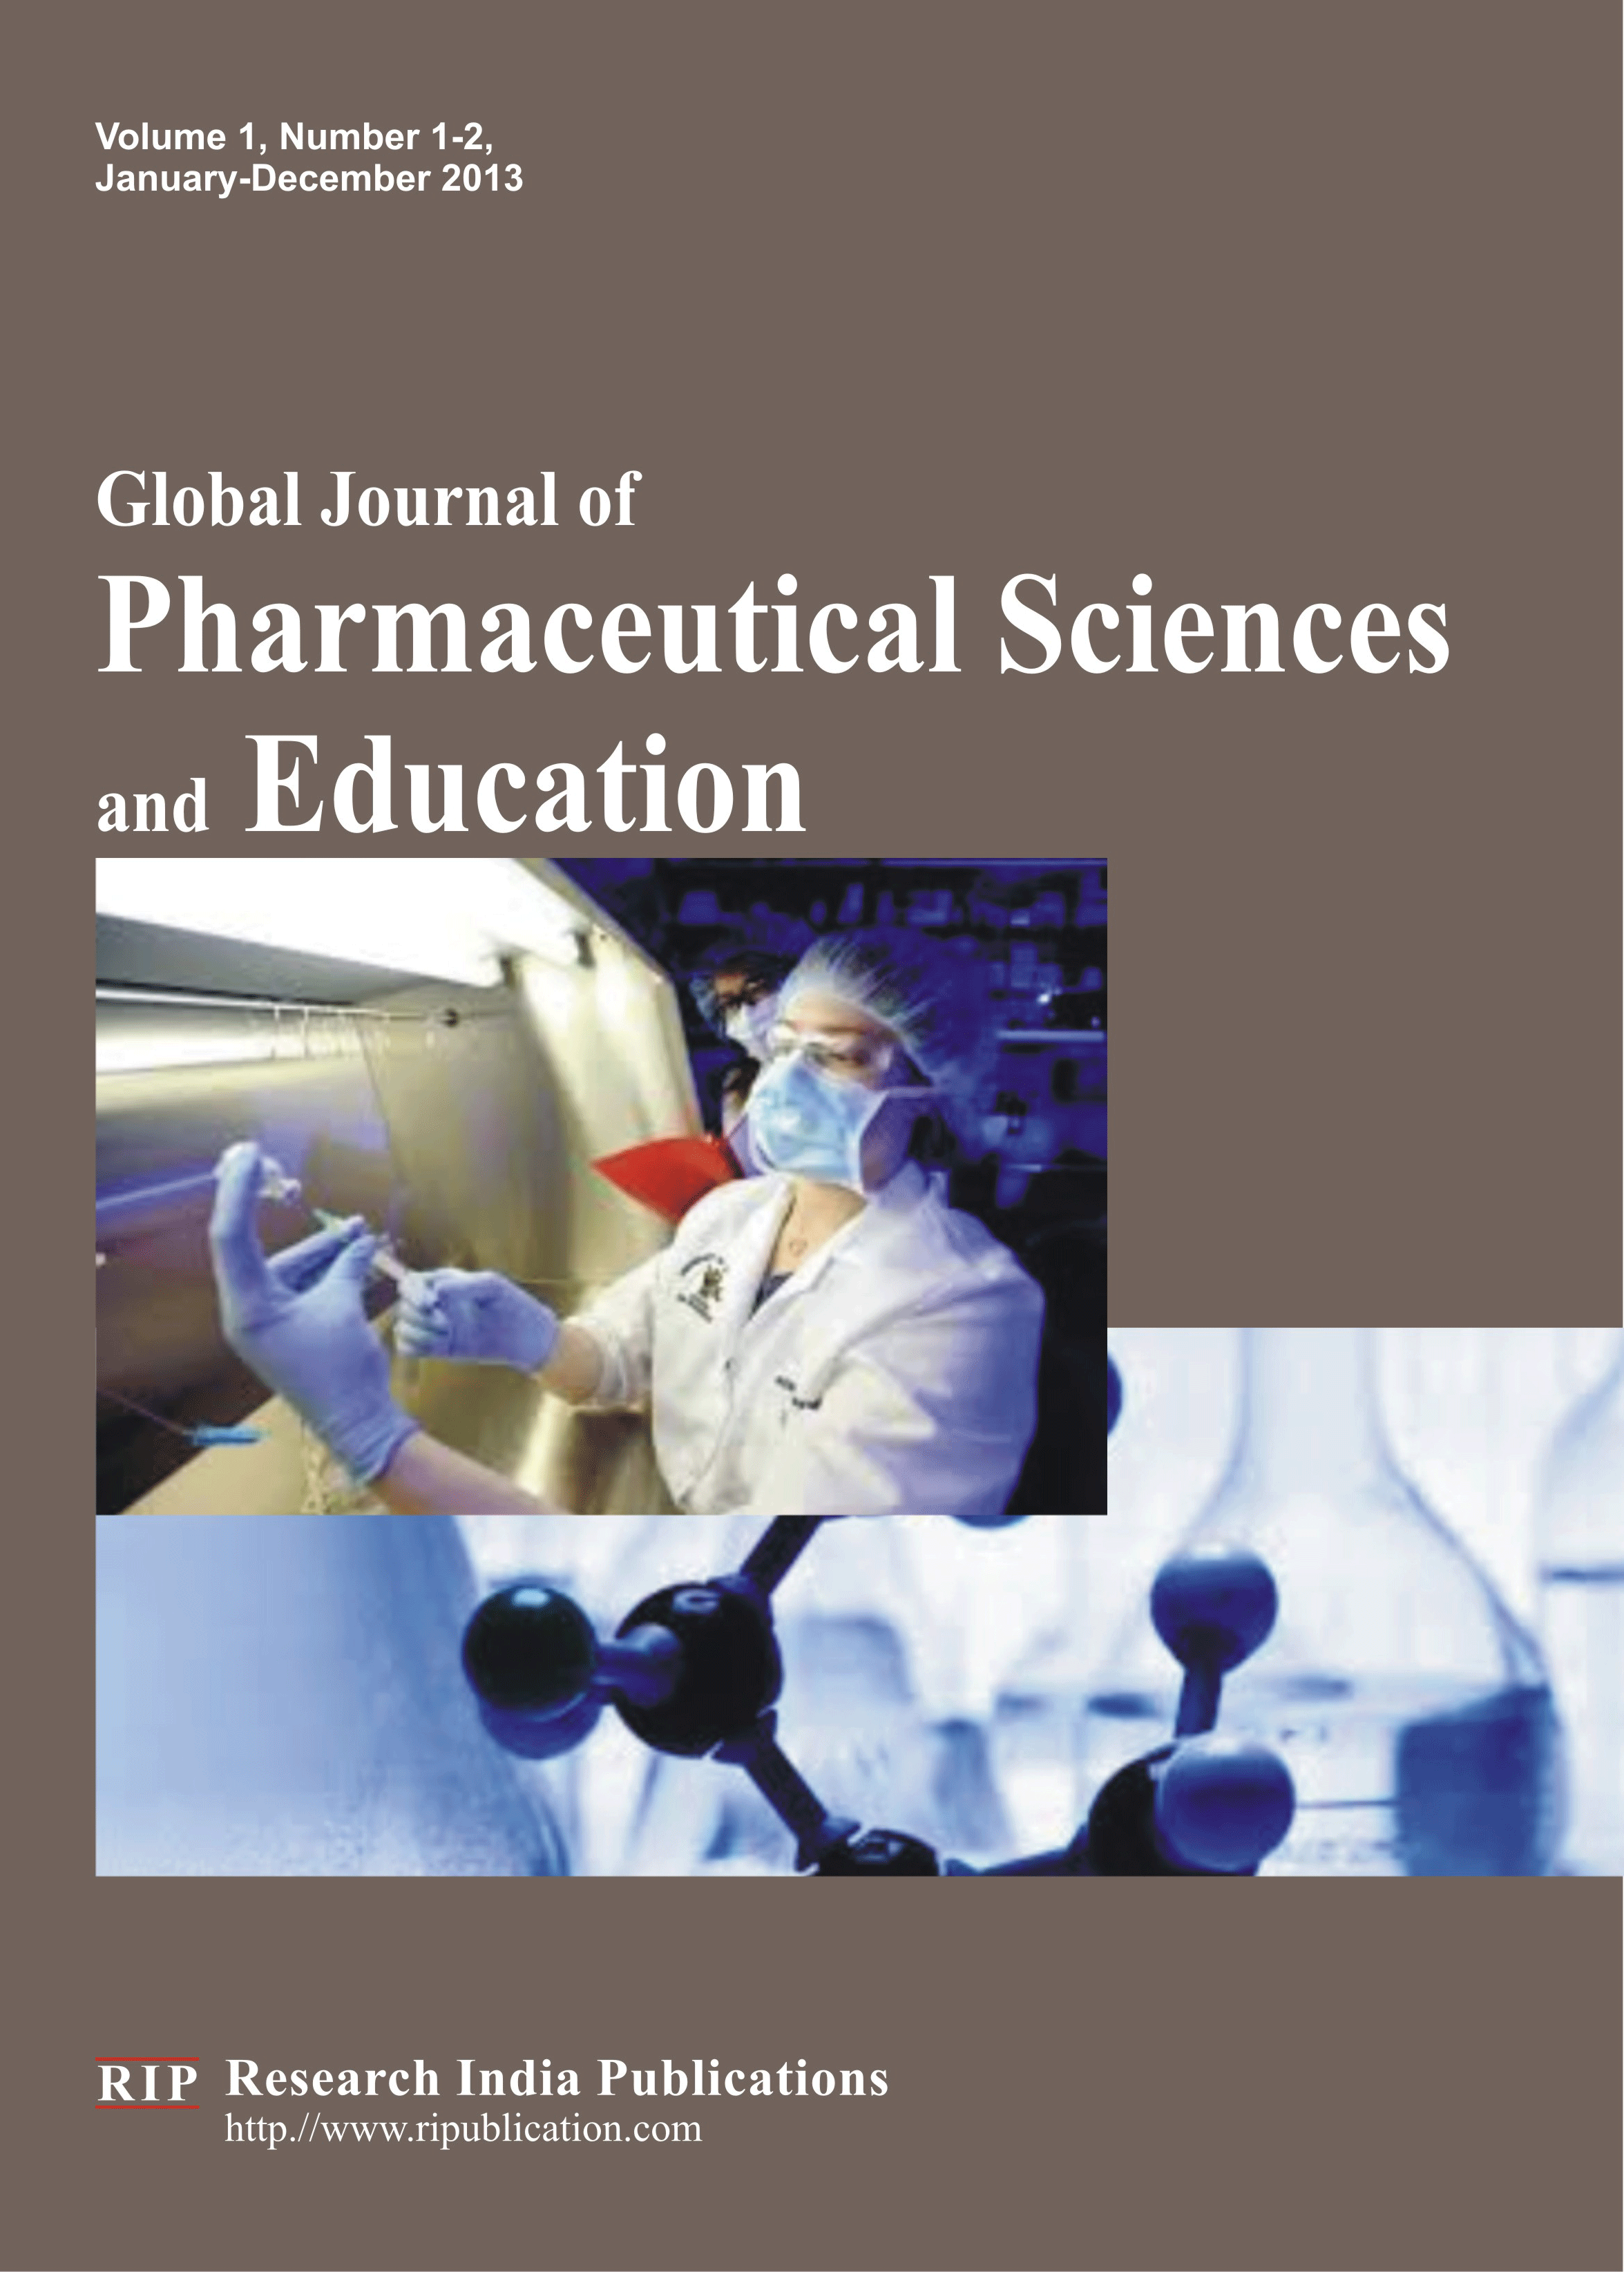 GJPPSE, Global Journal of Pharmaceutical Sciences and Education